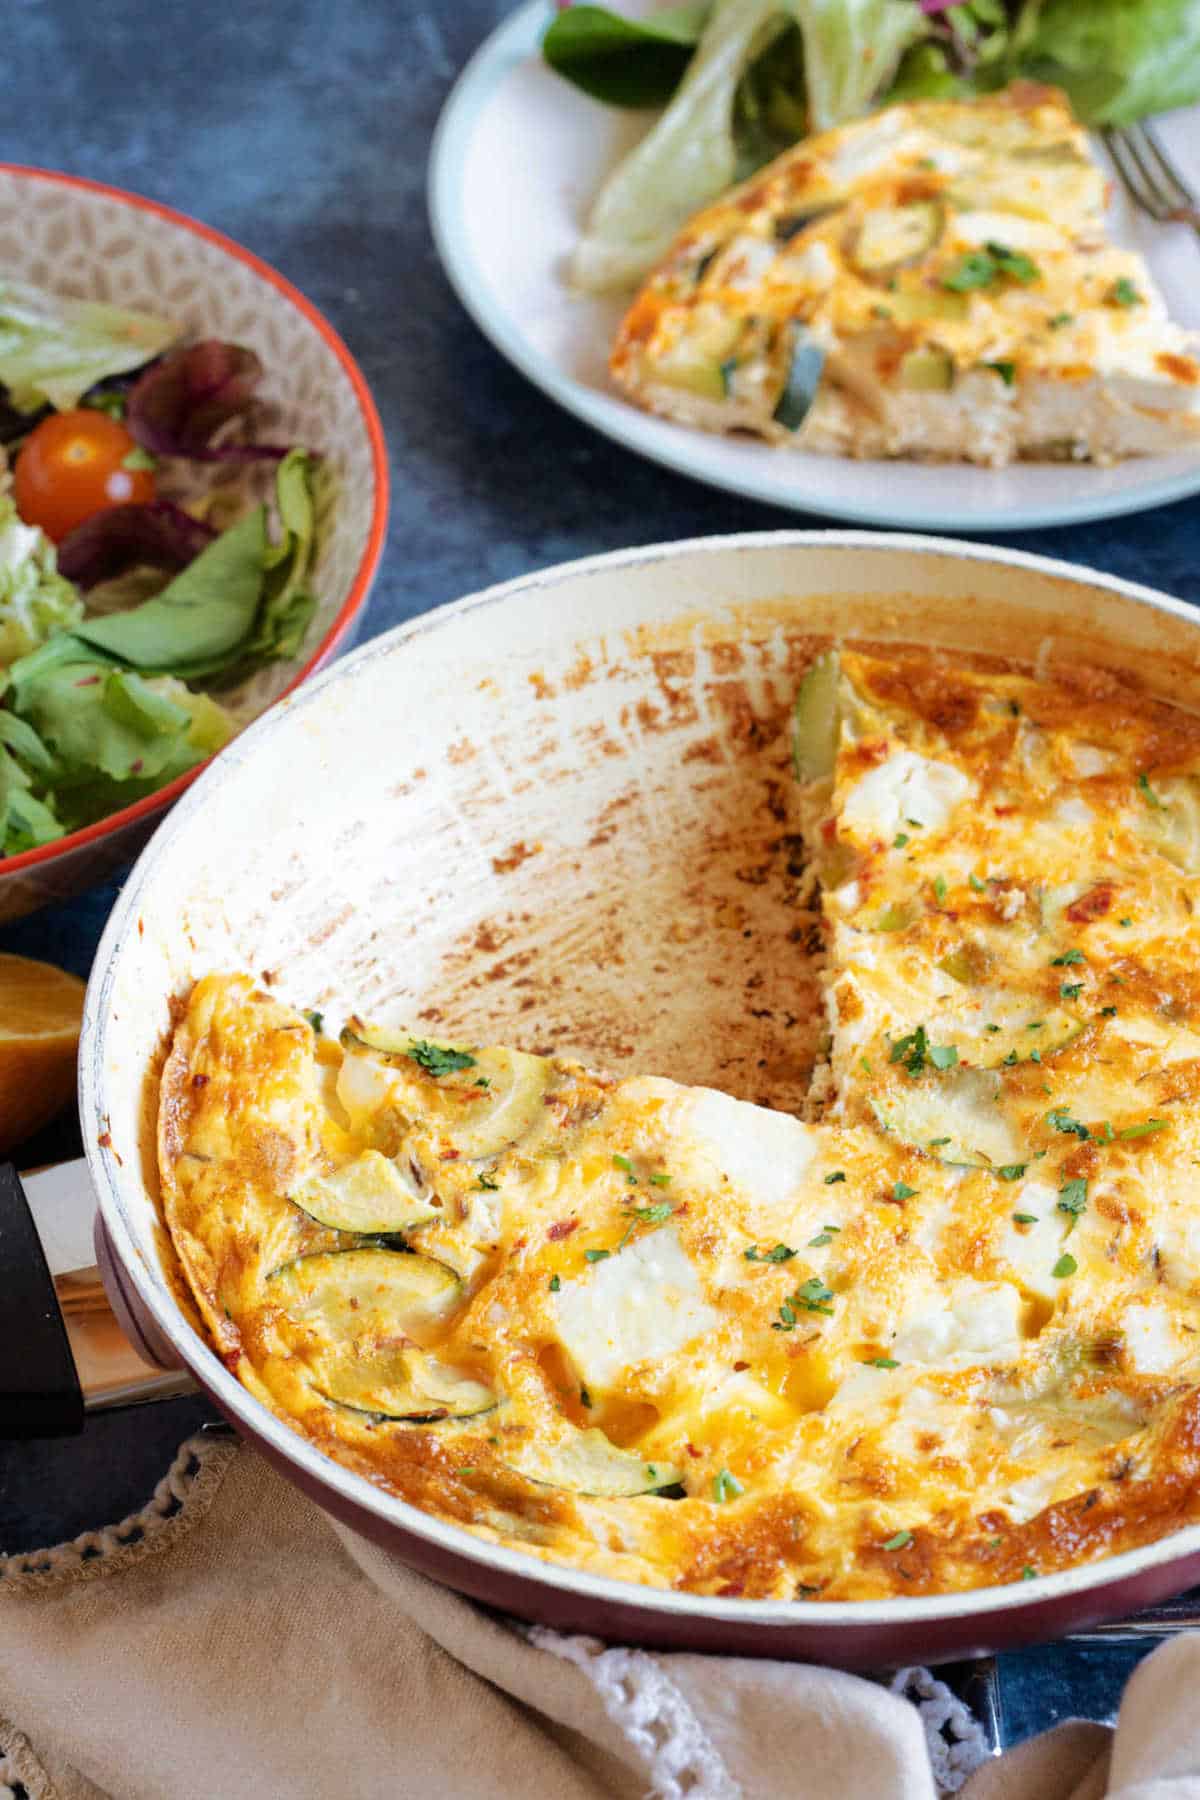 Courgette and feta frittata in a red frying pan.